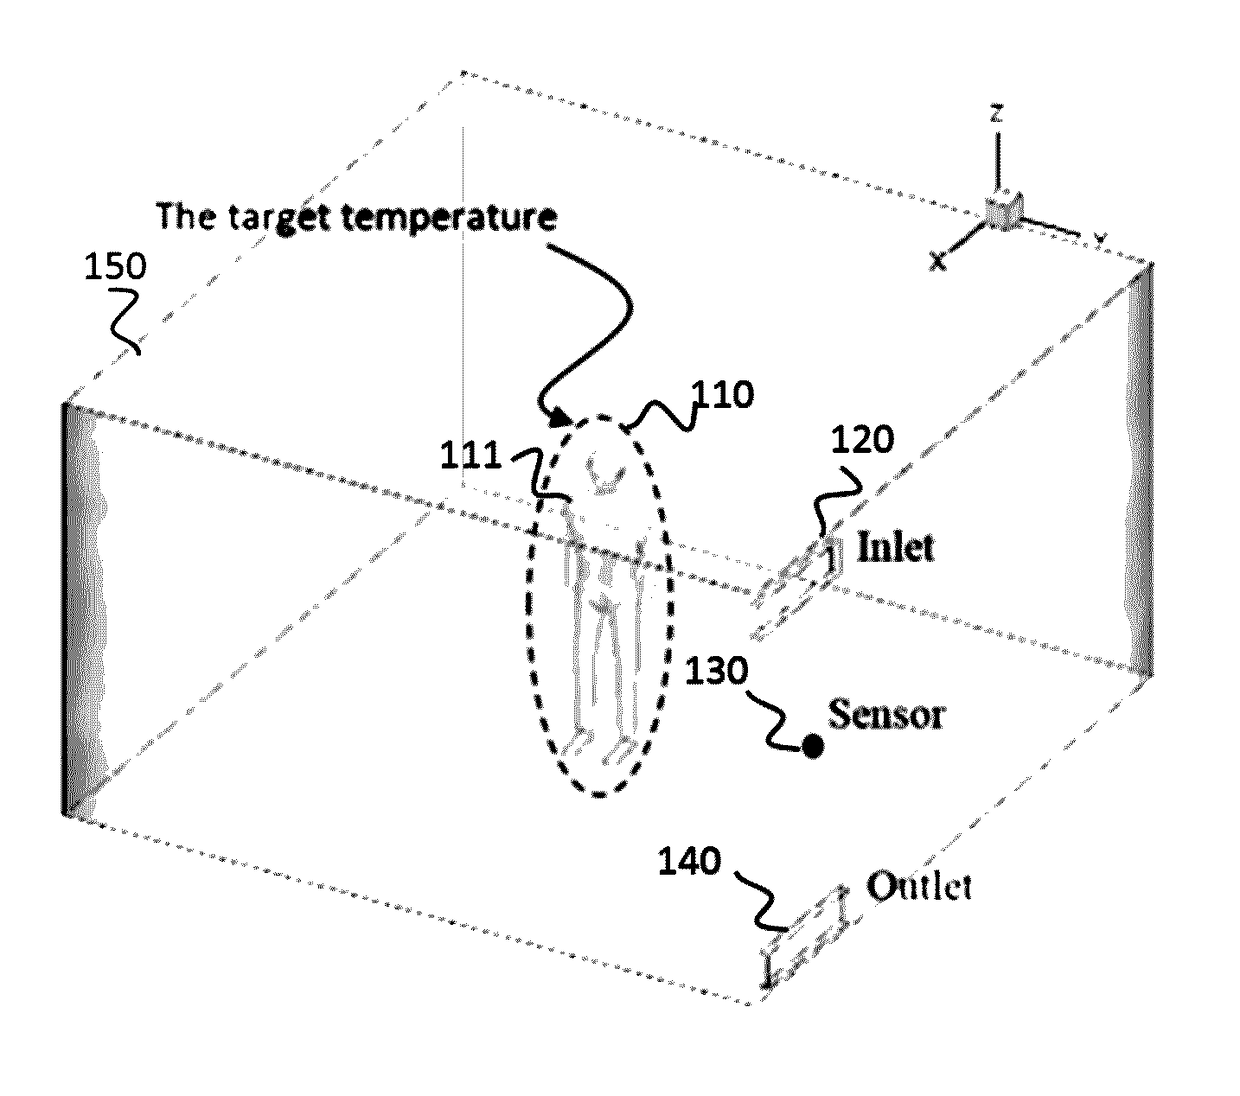 Virtual thermostat for a zonal temperature control